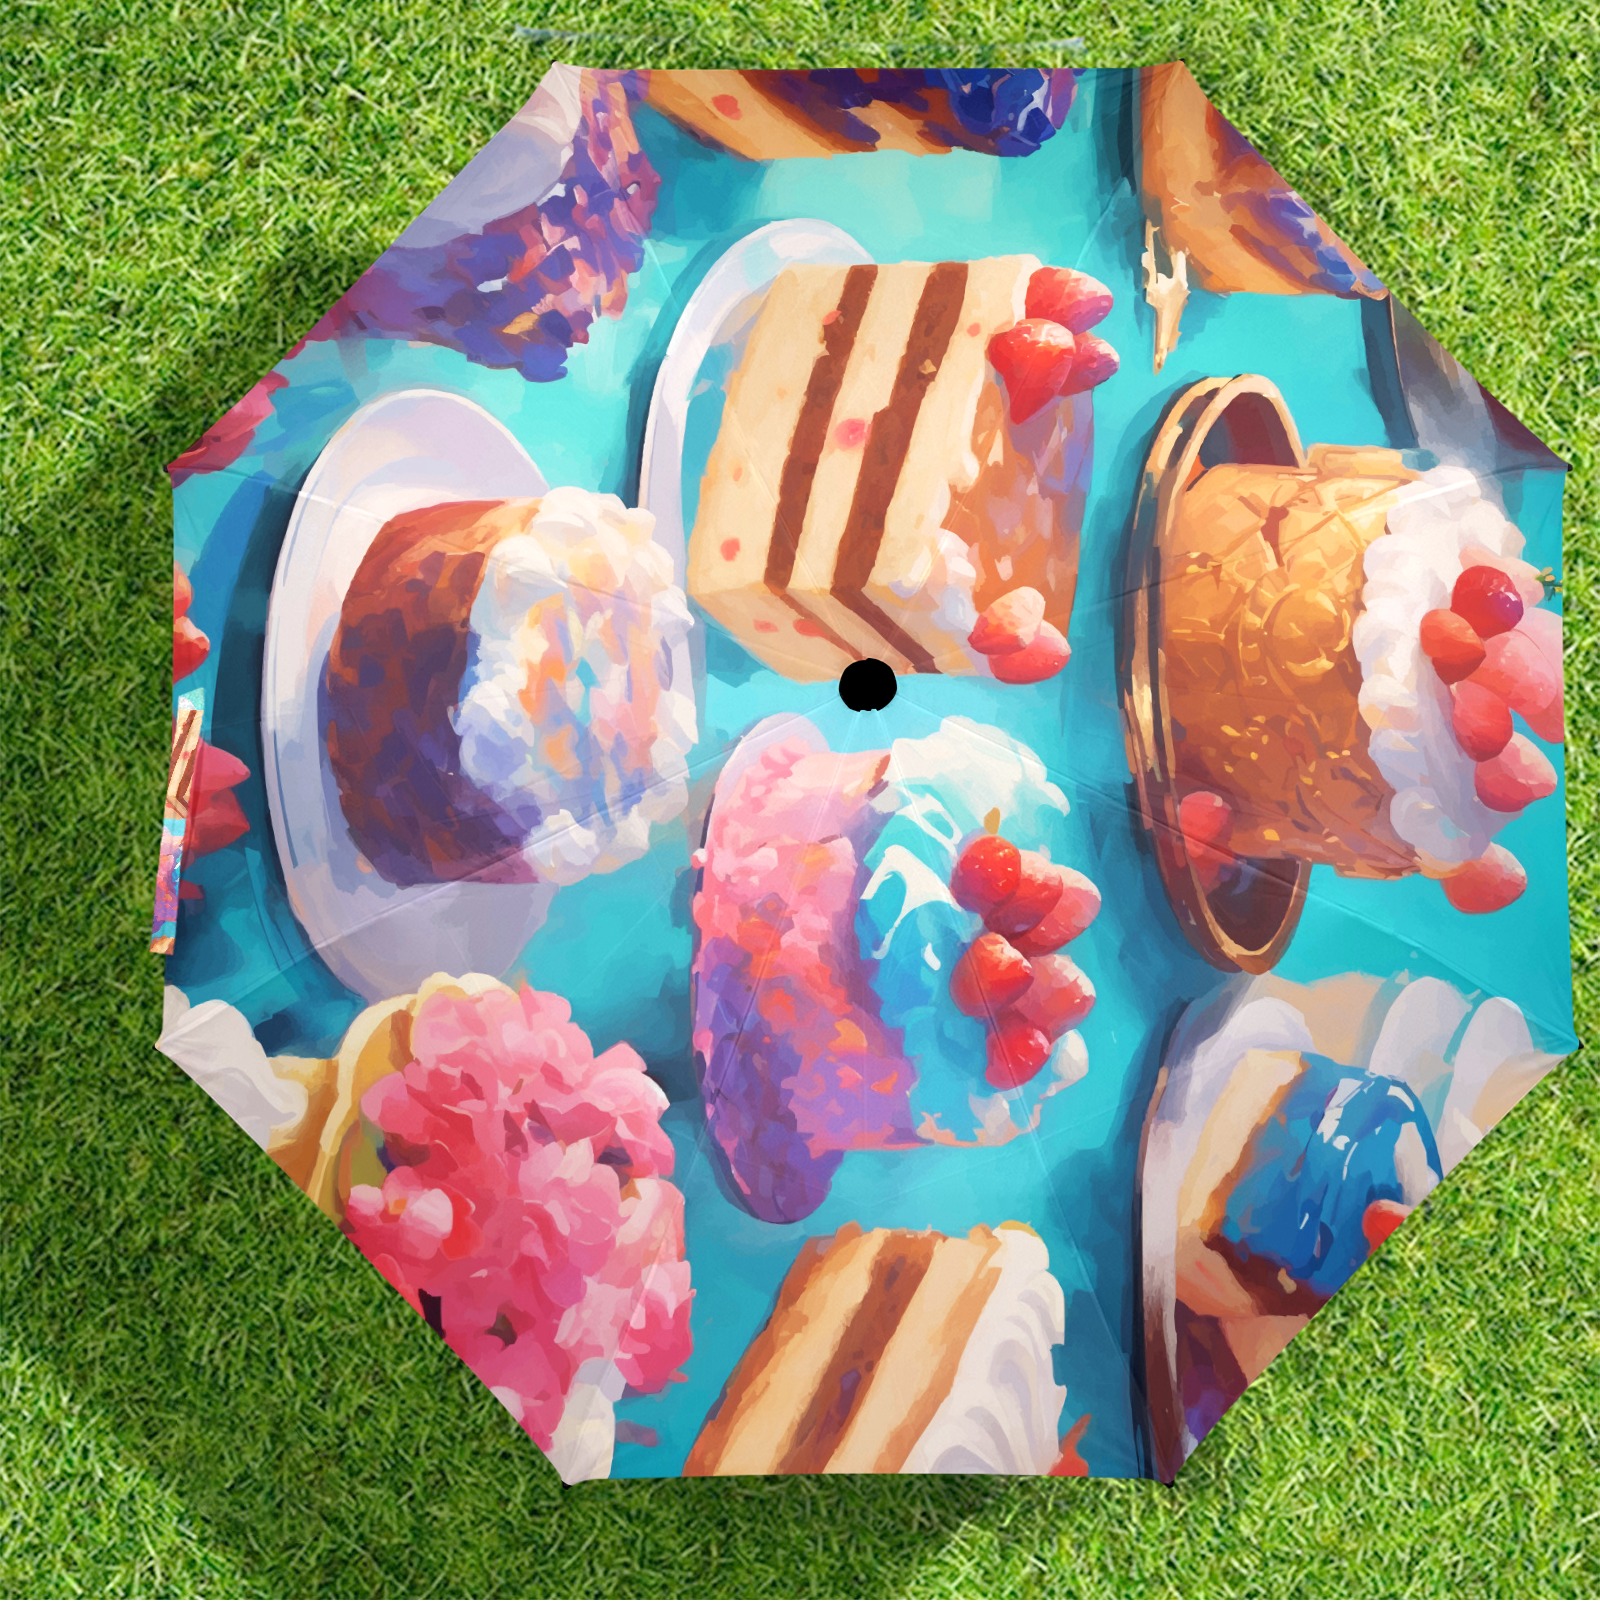 Variety of yummy cakes on a table. Sweet desserts. Semi-Automatic Foldable Umbrella (Model U12)